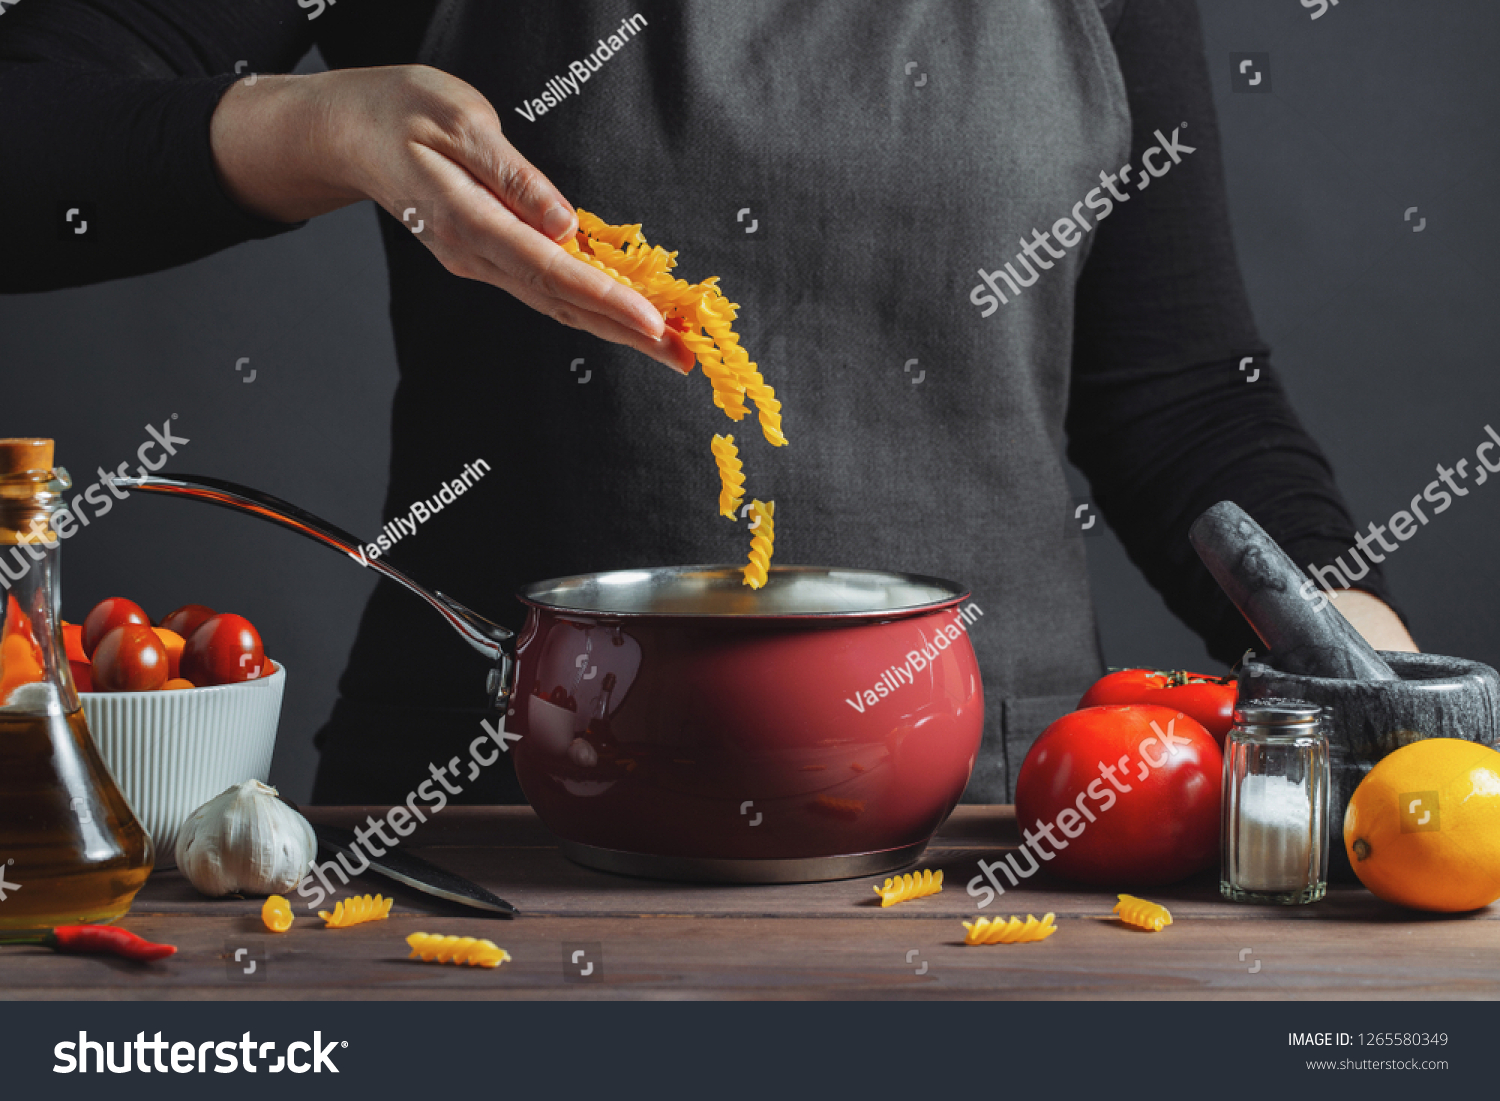 Cooking italian pasta in a pot in the kitchen, Chef preparing food, meal. The woman-the cook throws into the pot the pasta fusilli #1265580349